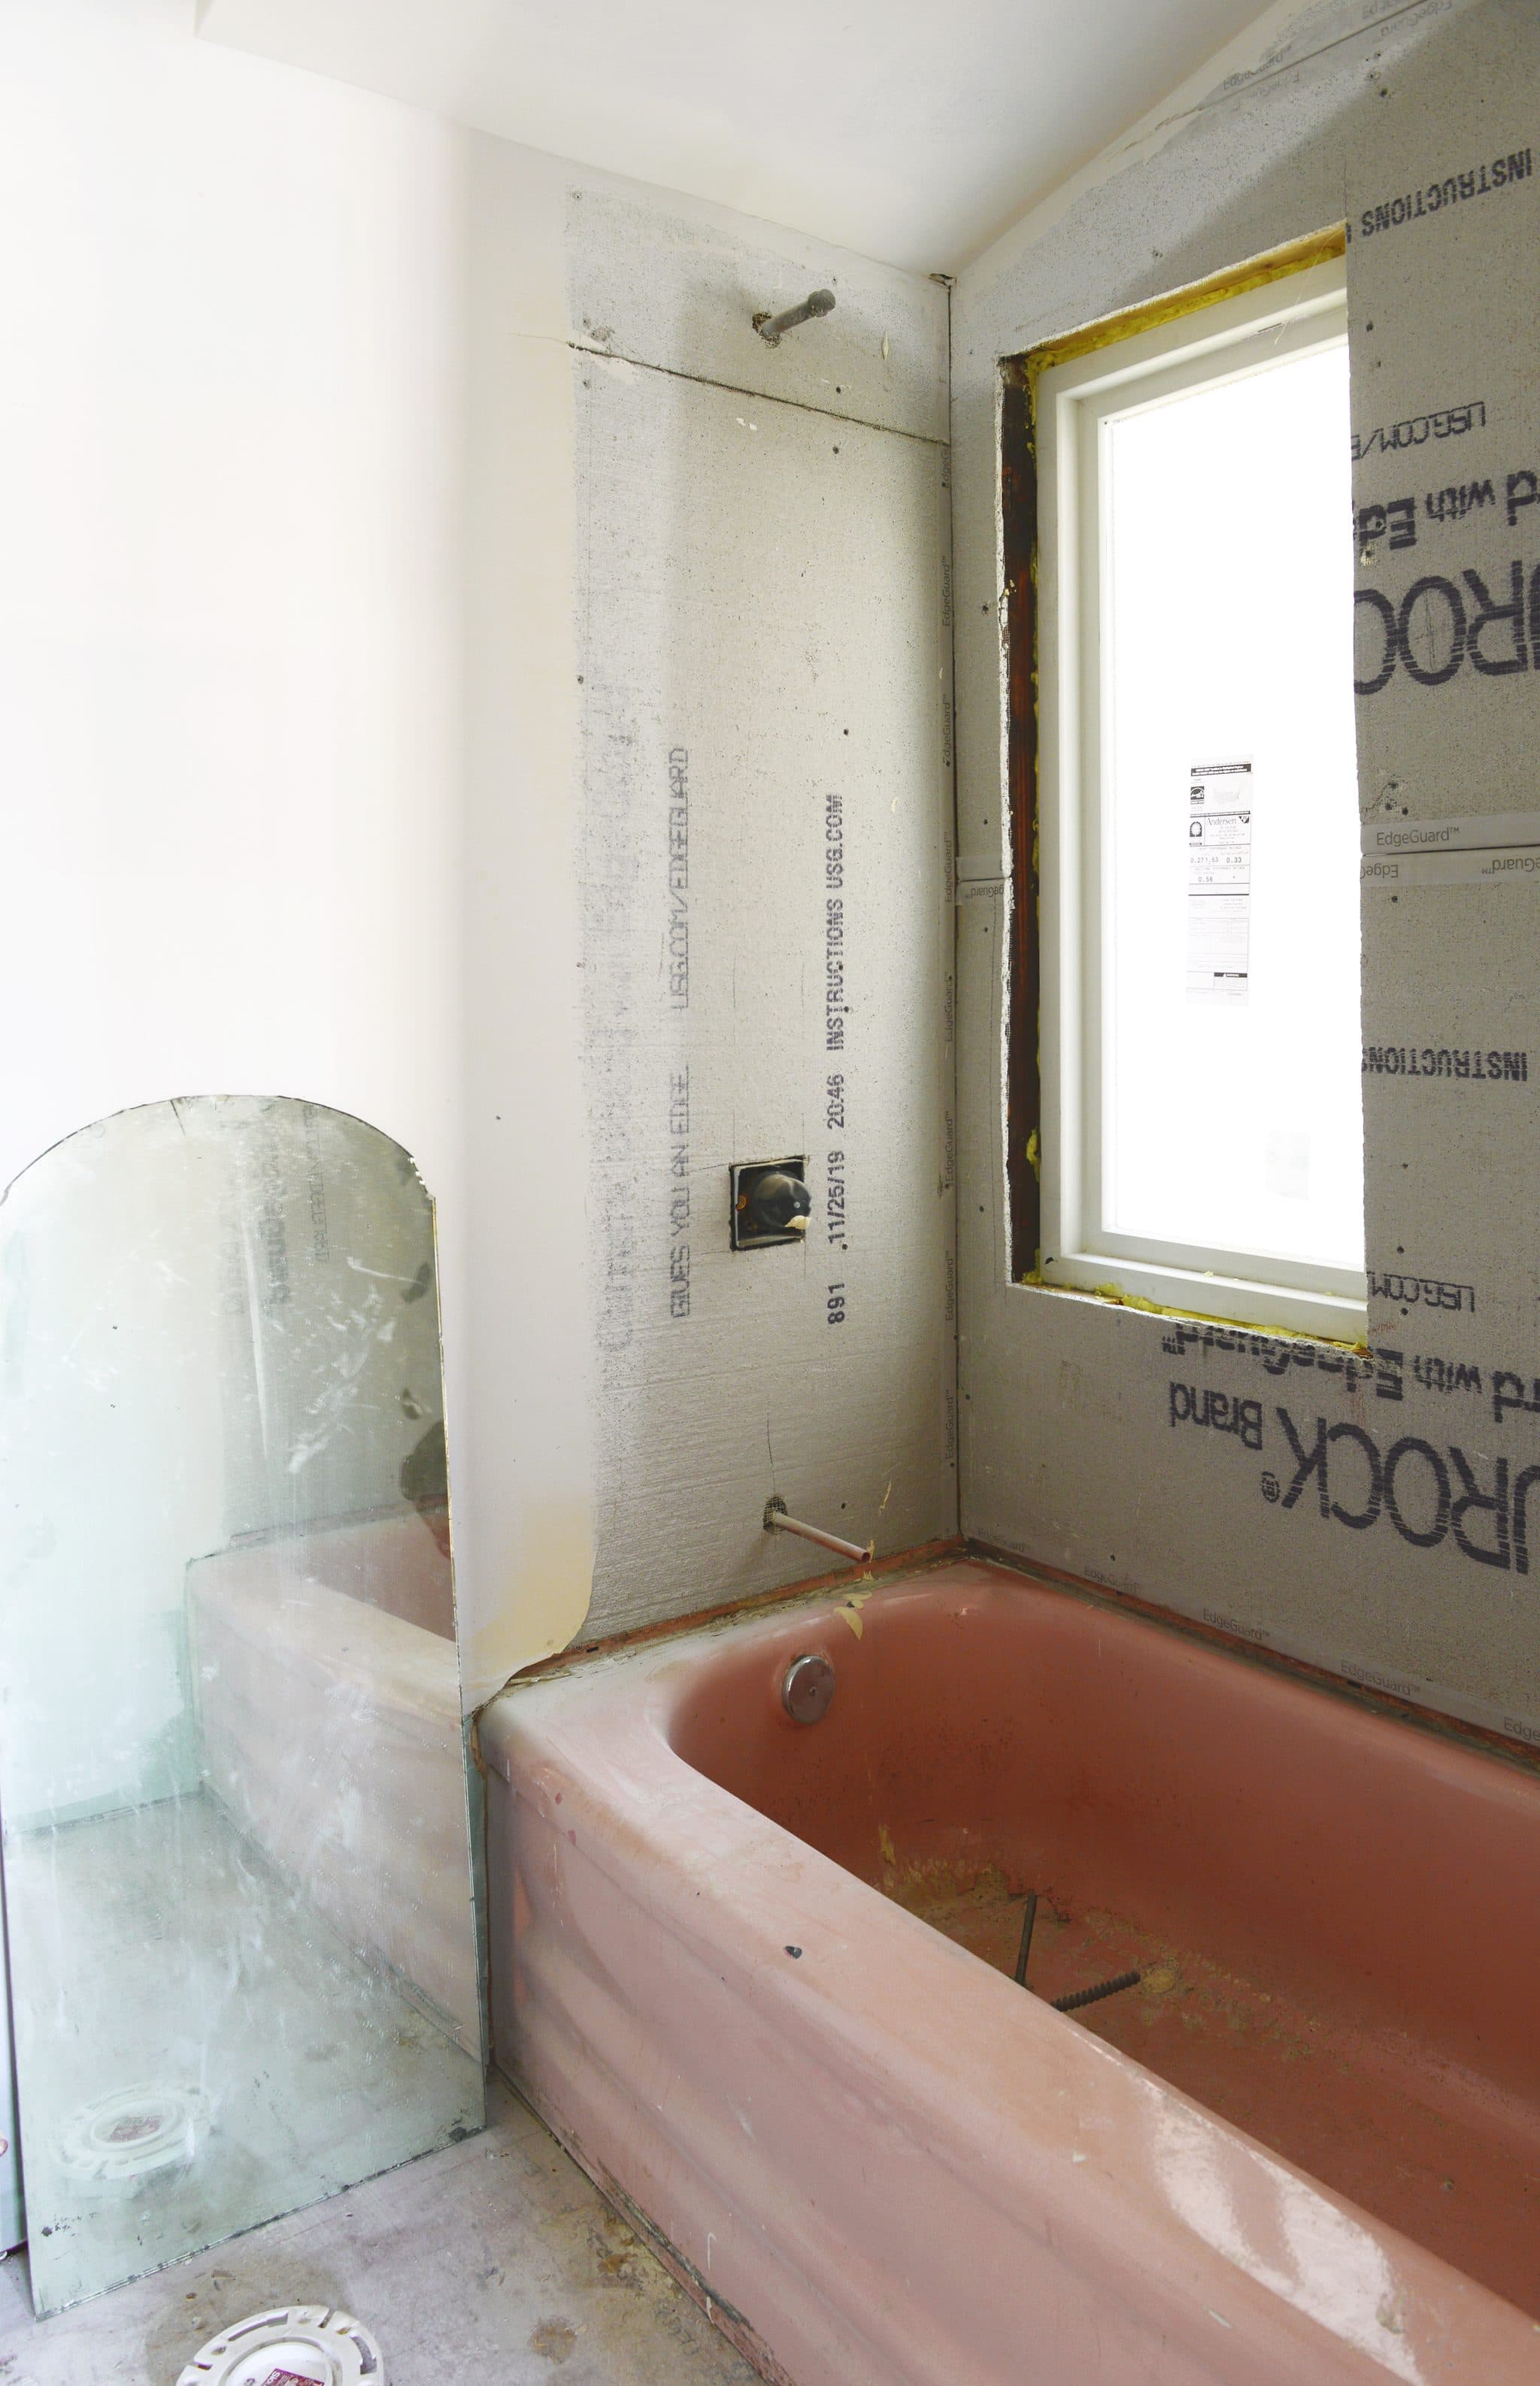 A primed bathroom sits ready for tile and finishing touches // via yellow brick home